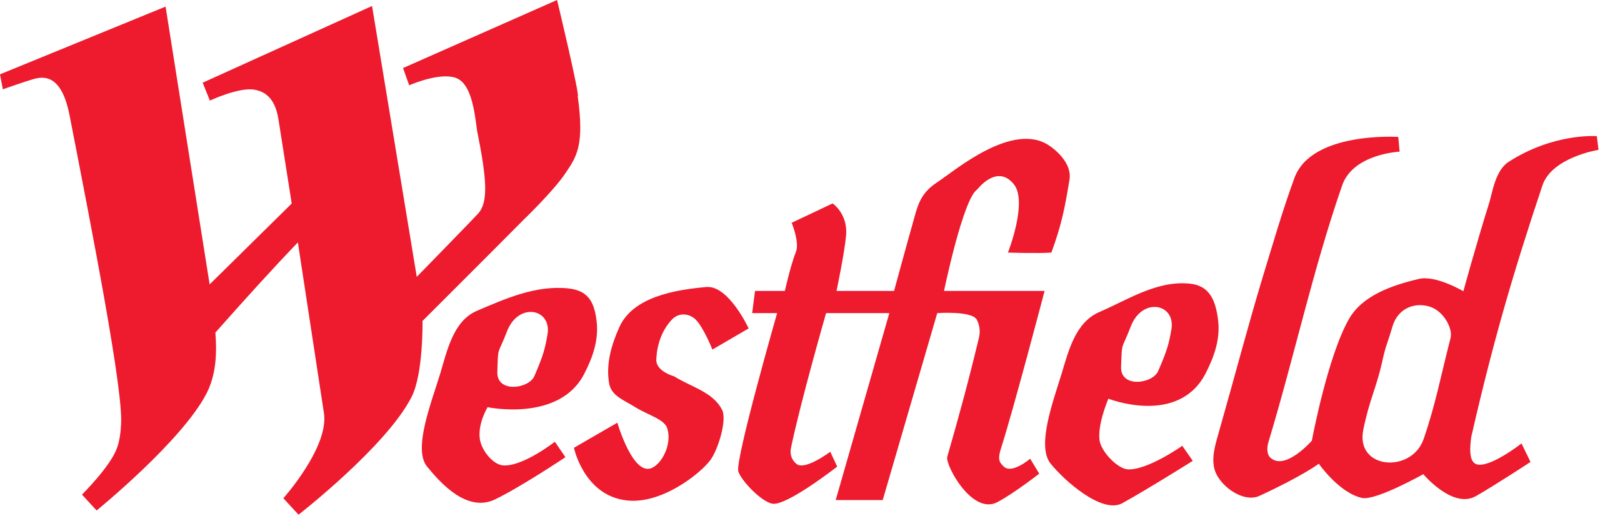 The Westfield Group logo